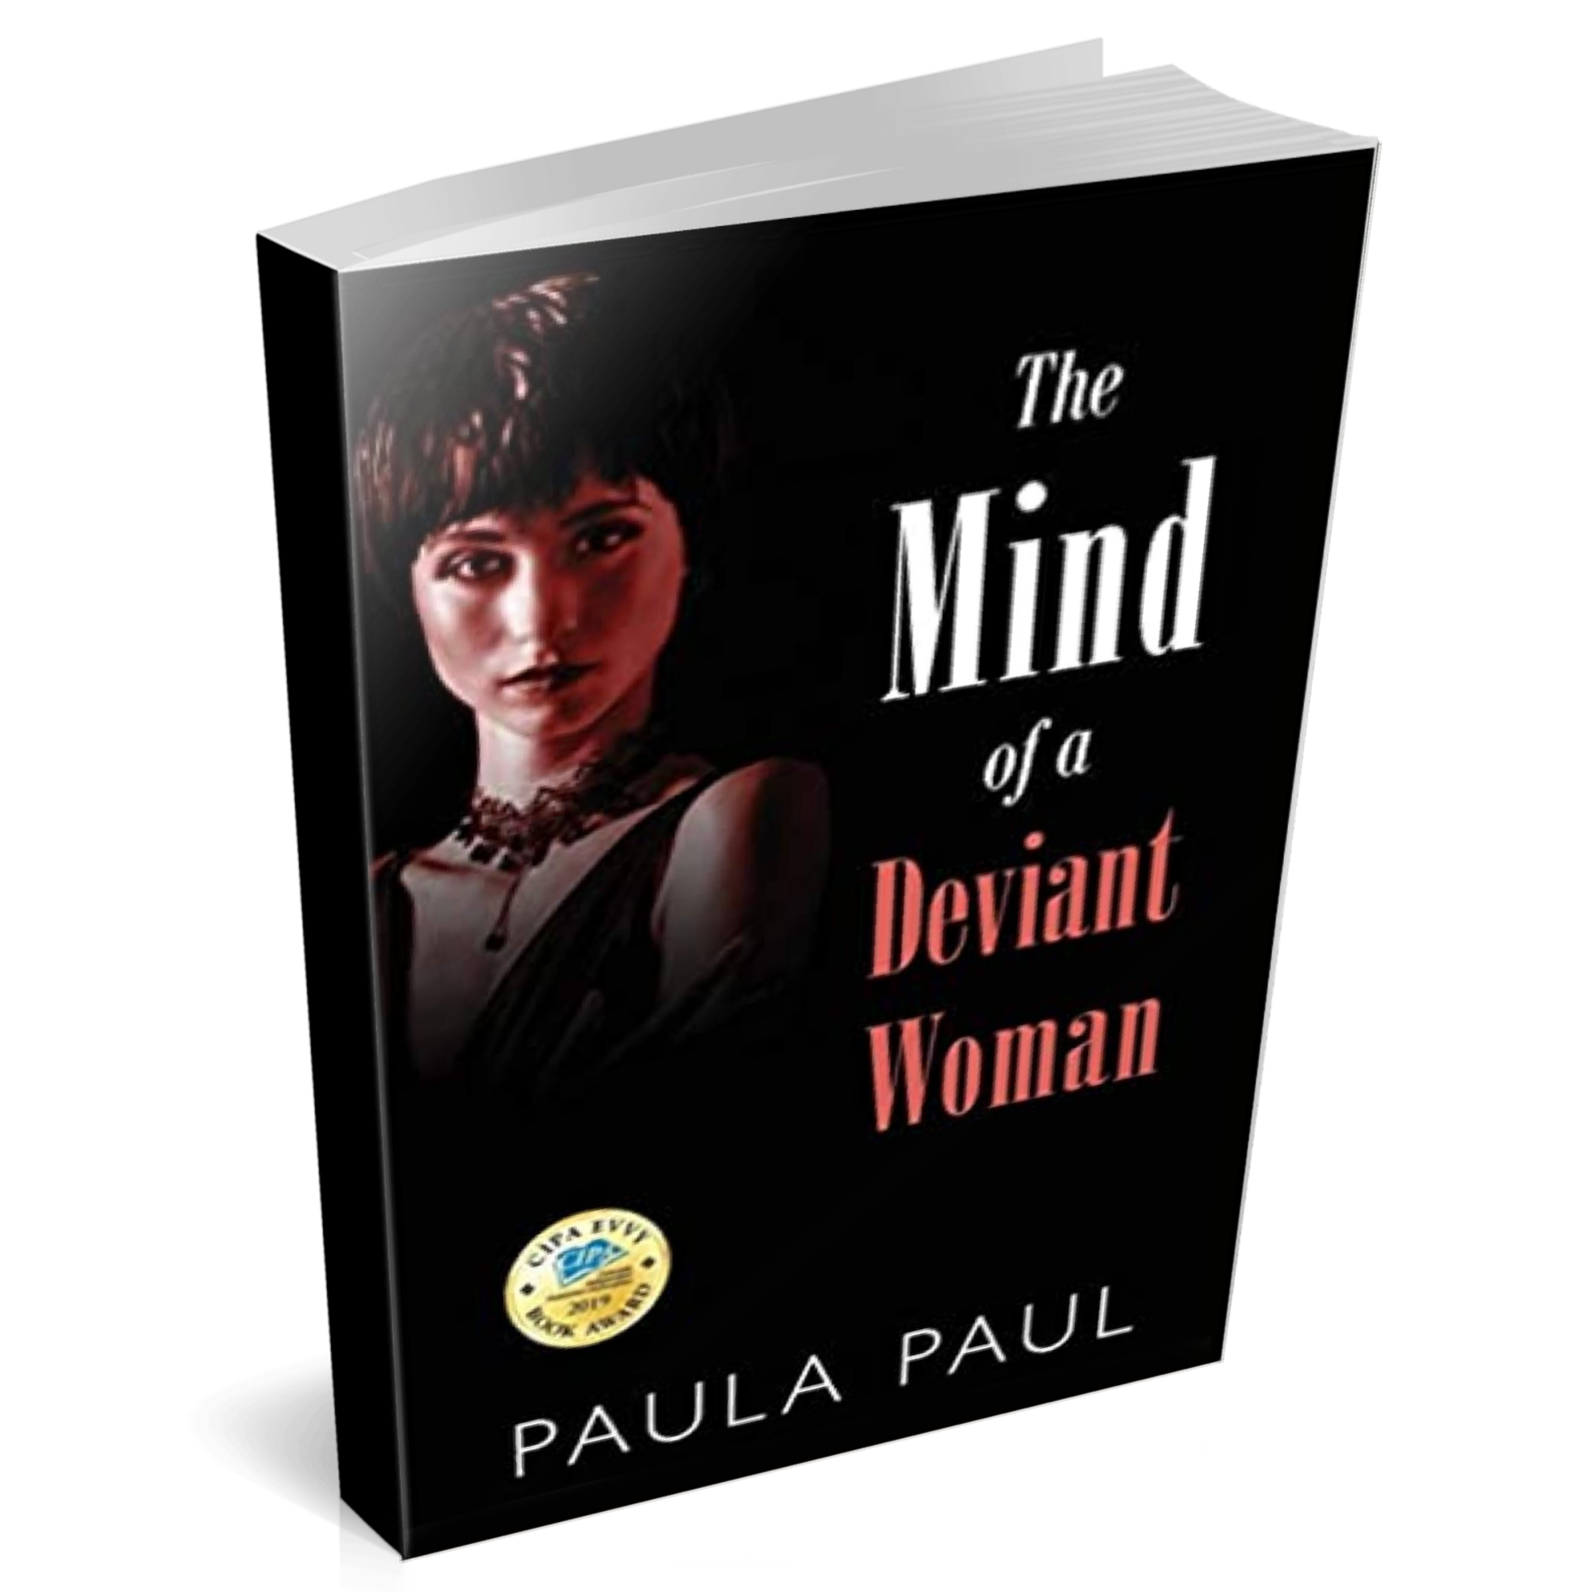 Art for The Mind of a Deviant Woman by Paula Paul 